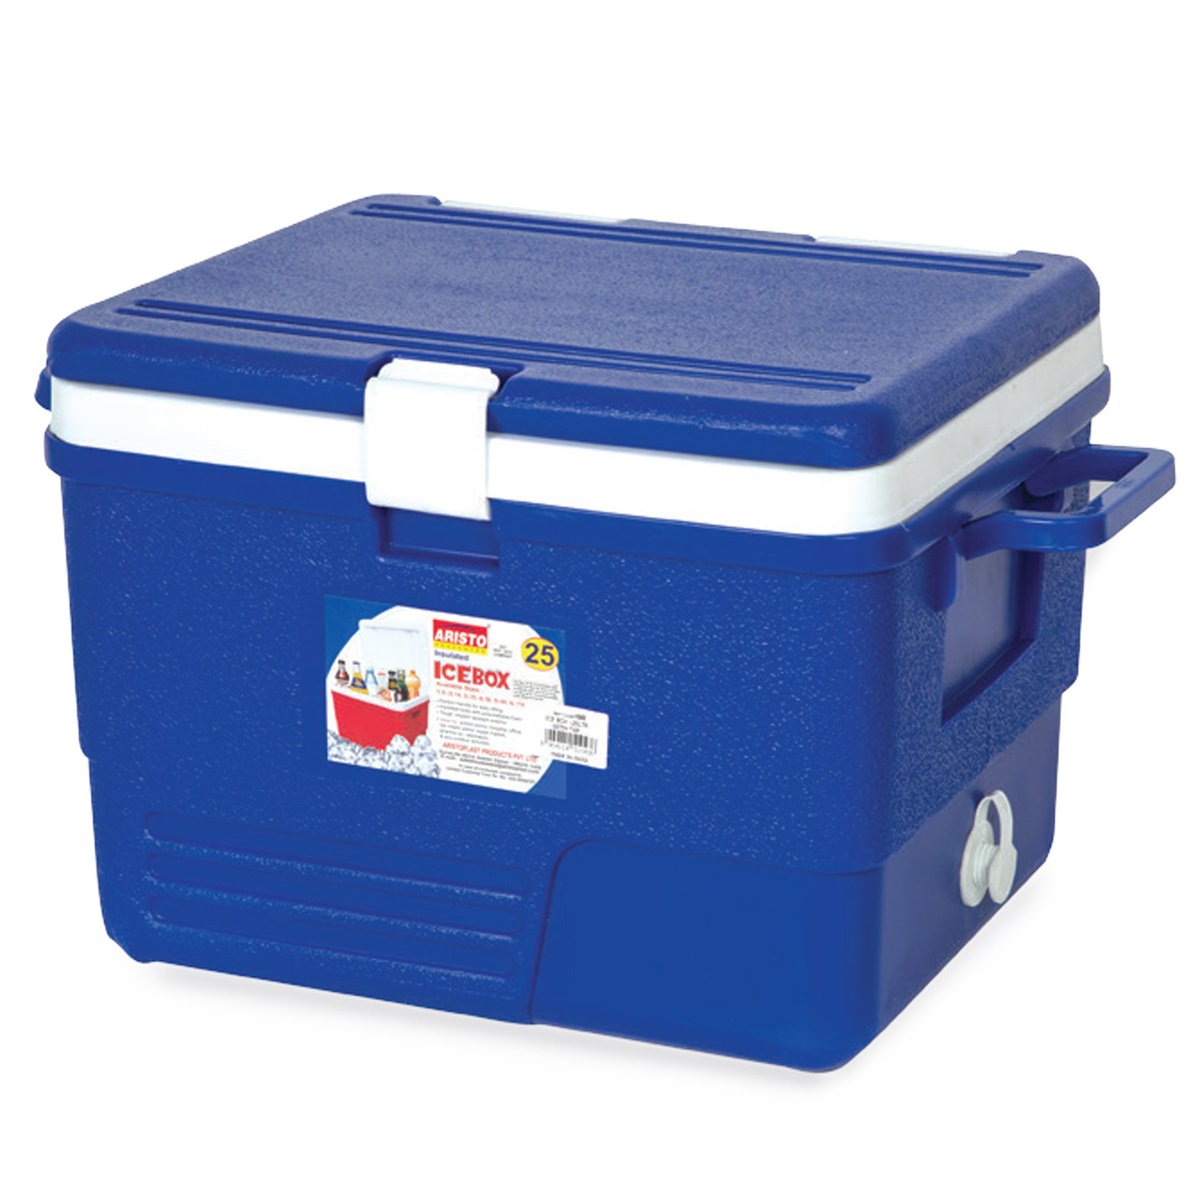 Aristo Cooler Box With Plug 25Ltr Assorted Colors